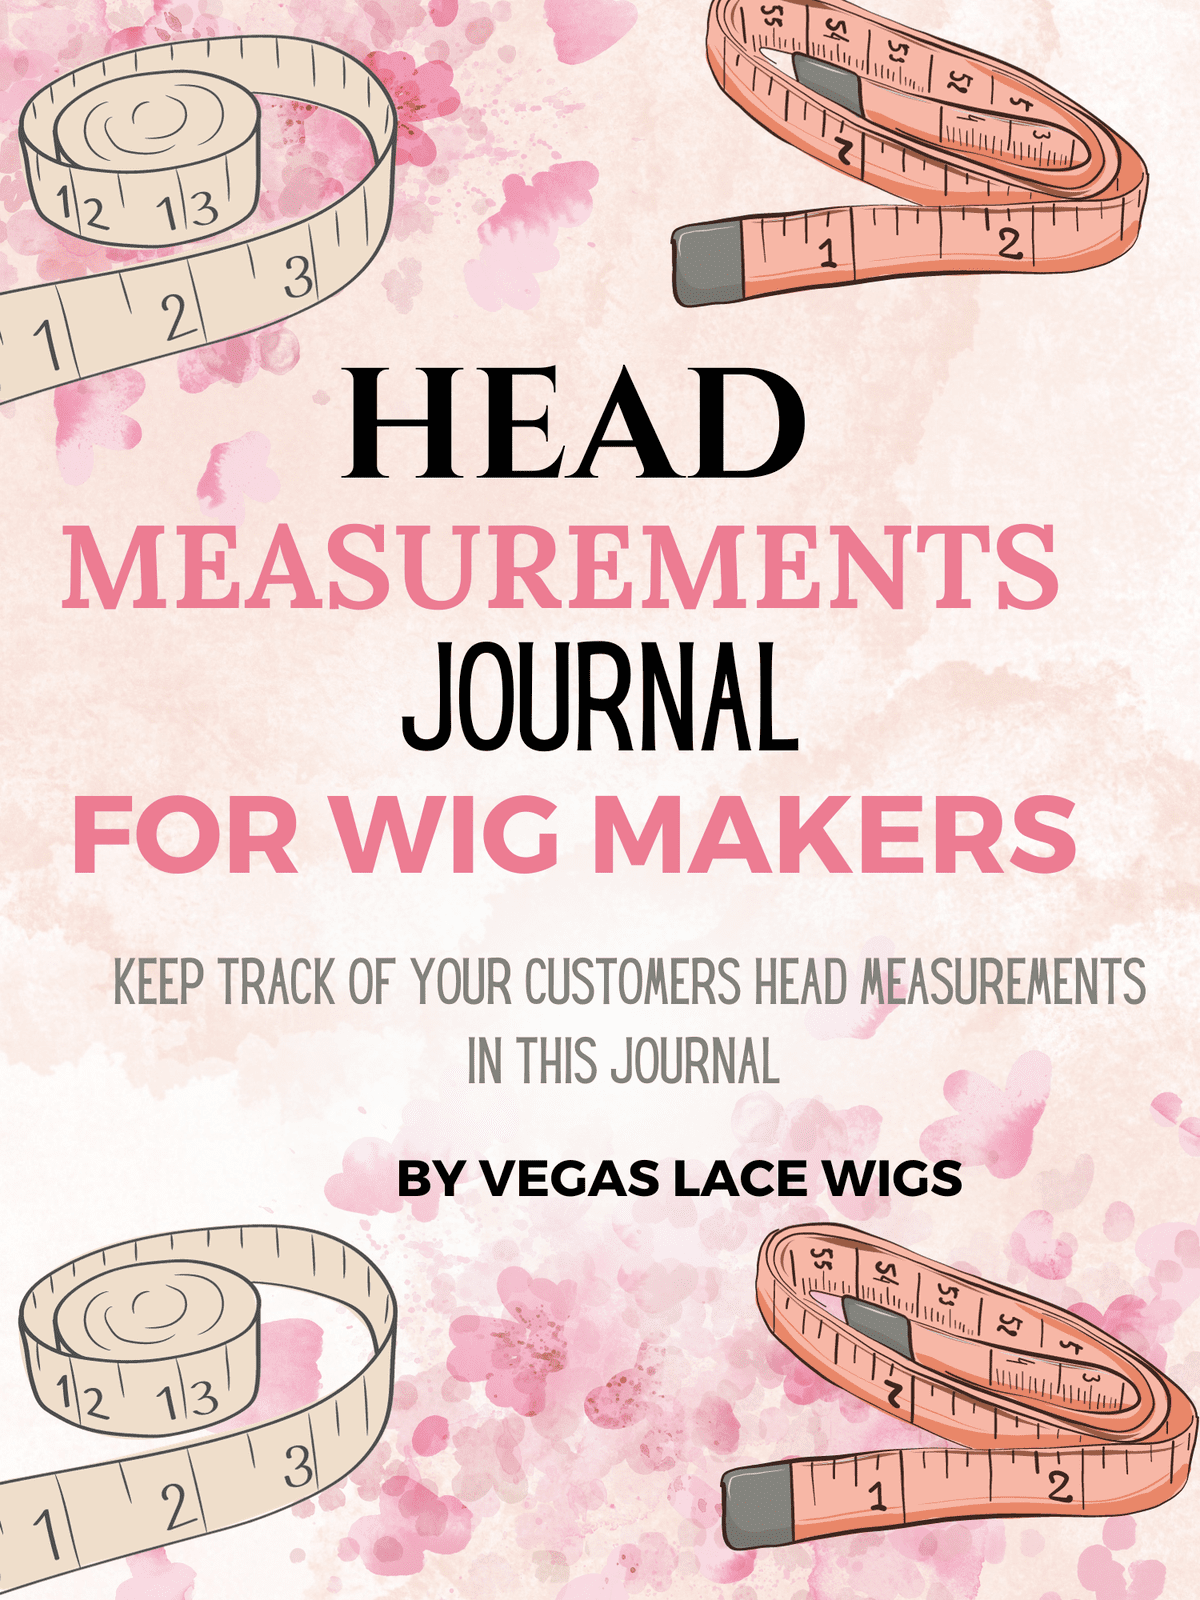 Head Measurements Journal for Wig Makers